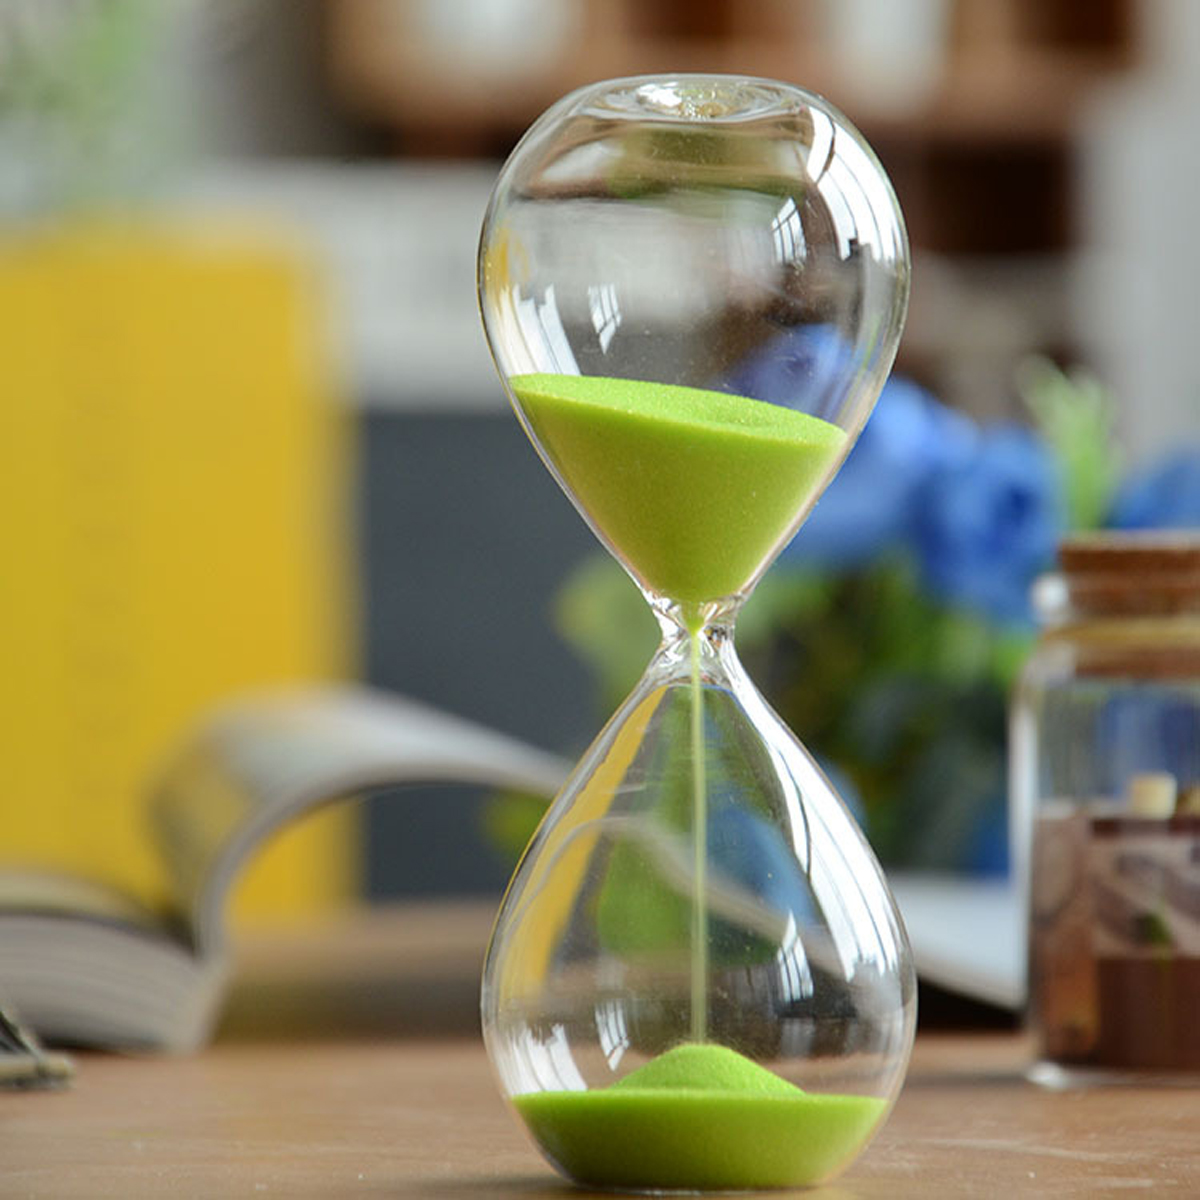 5 Minutes Sandglass Hourglass Time Counter Count Down Timer Clock Decorative Crafts at ...